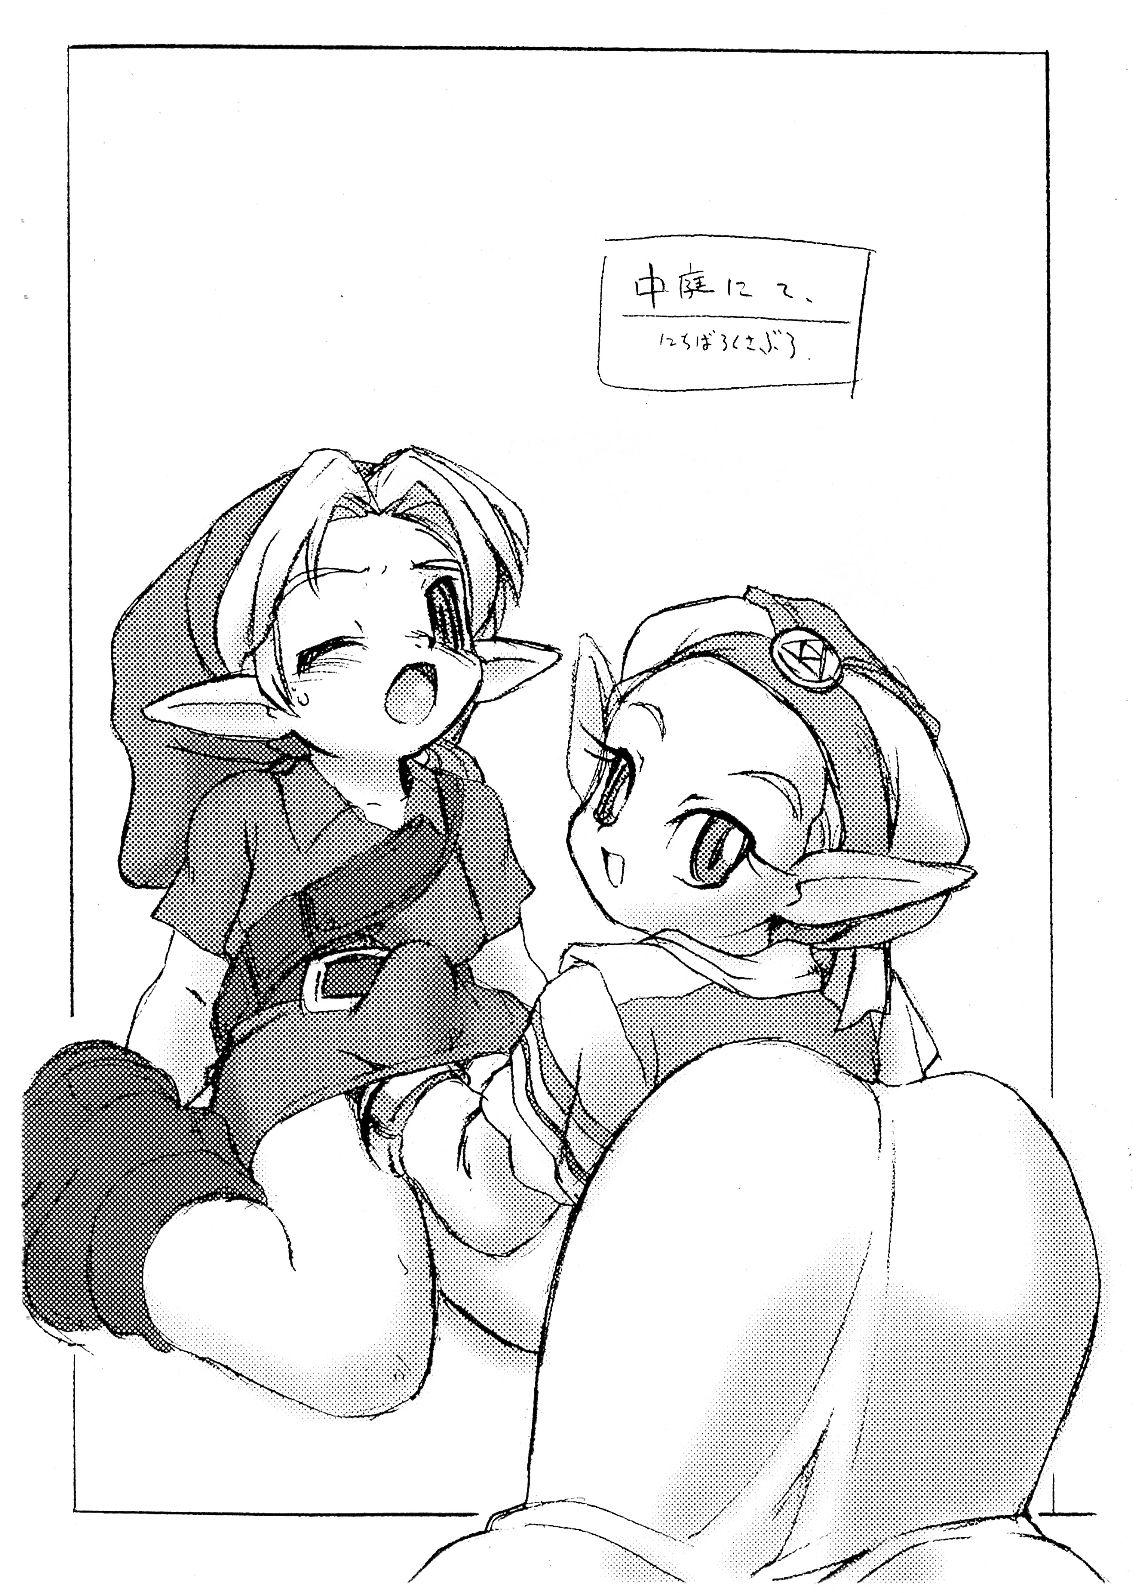 Teacher TOUCH DASH! + Omake - The legend of zelda Bakusou kyoudai lets and go Asian - Page 7